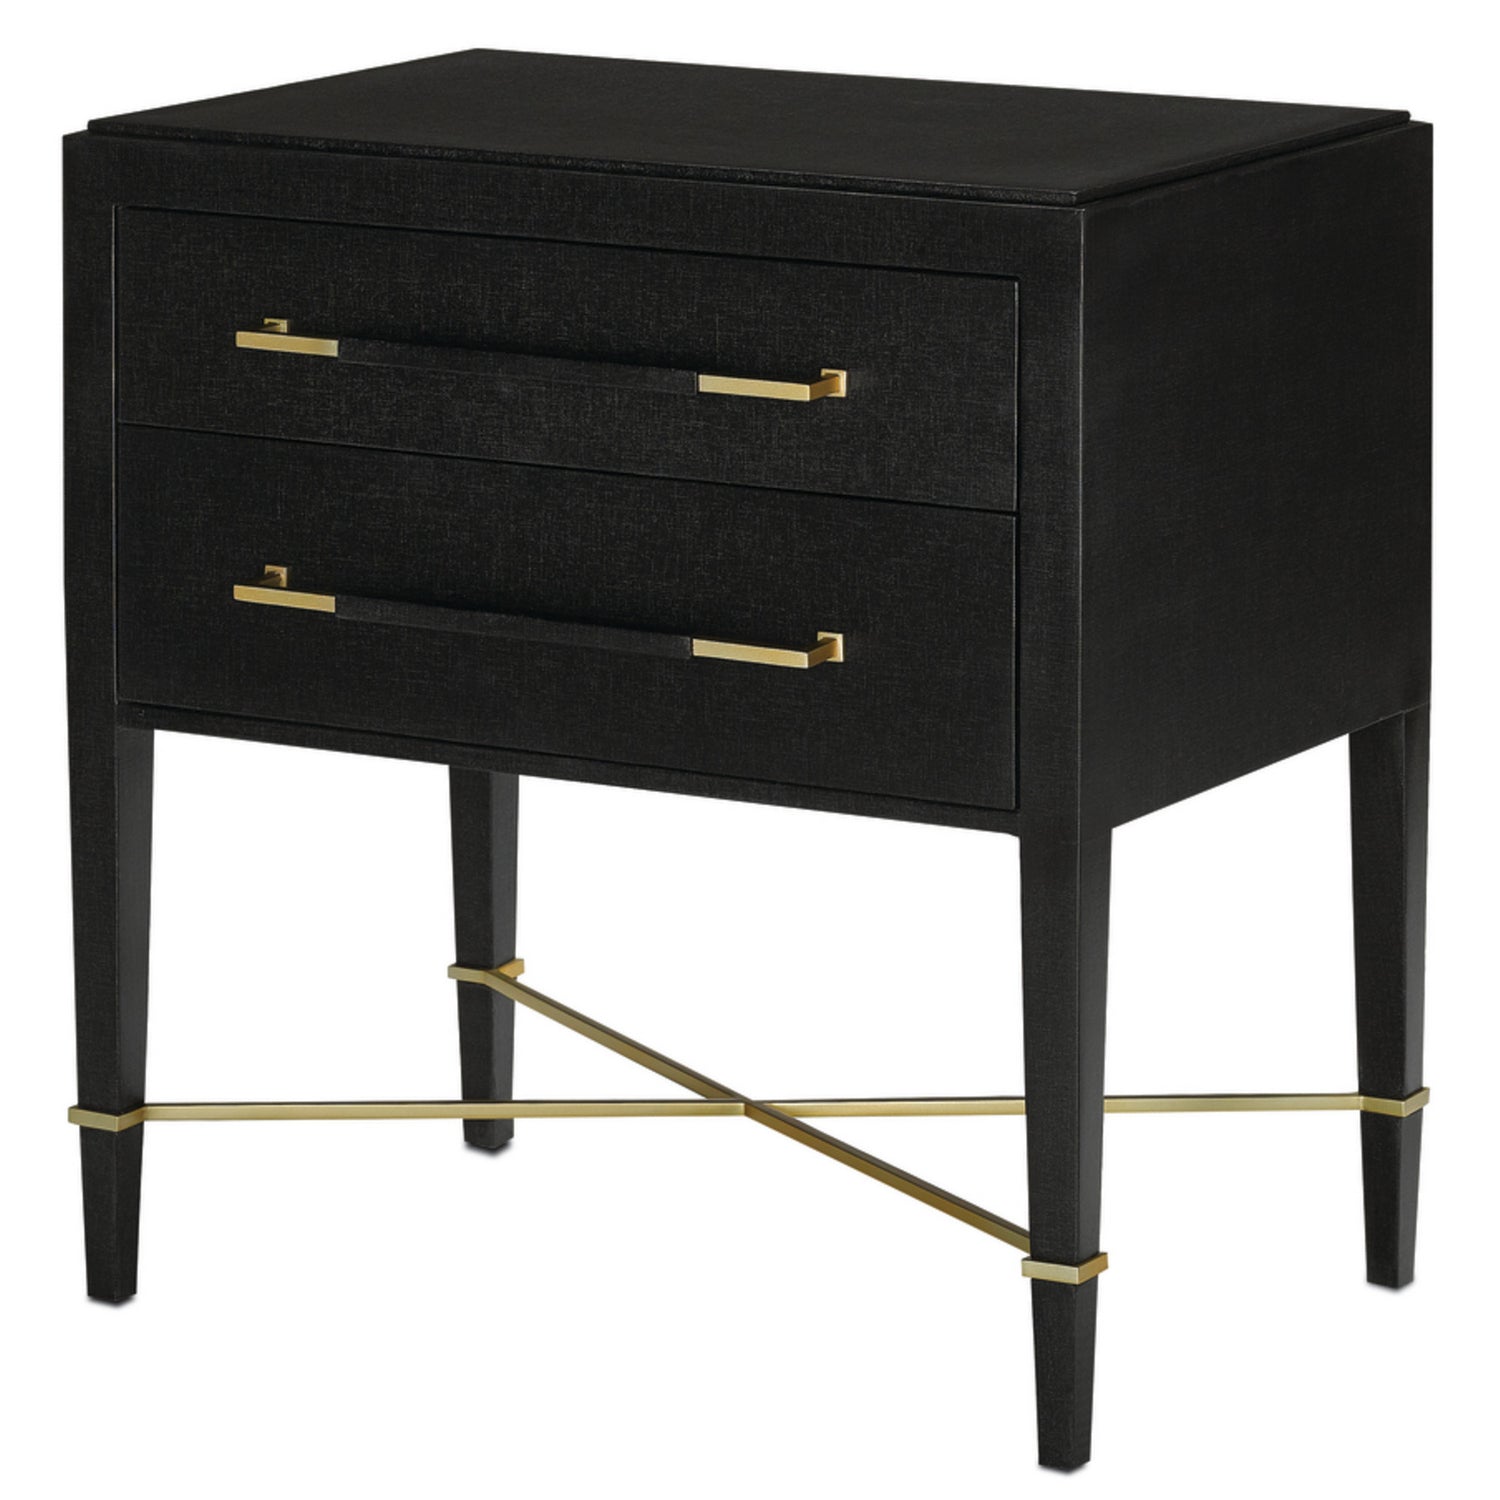 Nightstand from the Verona collection in Black Lacquered Linen/Champagne finish